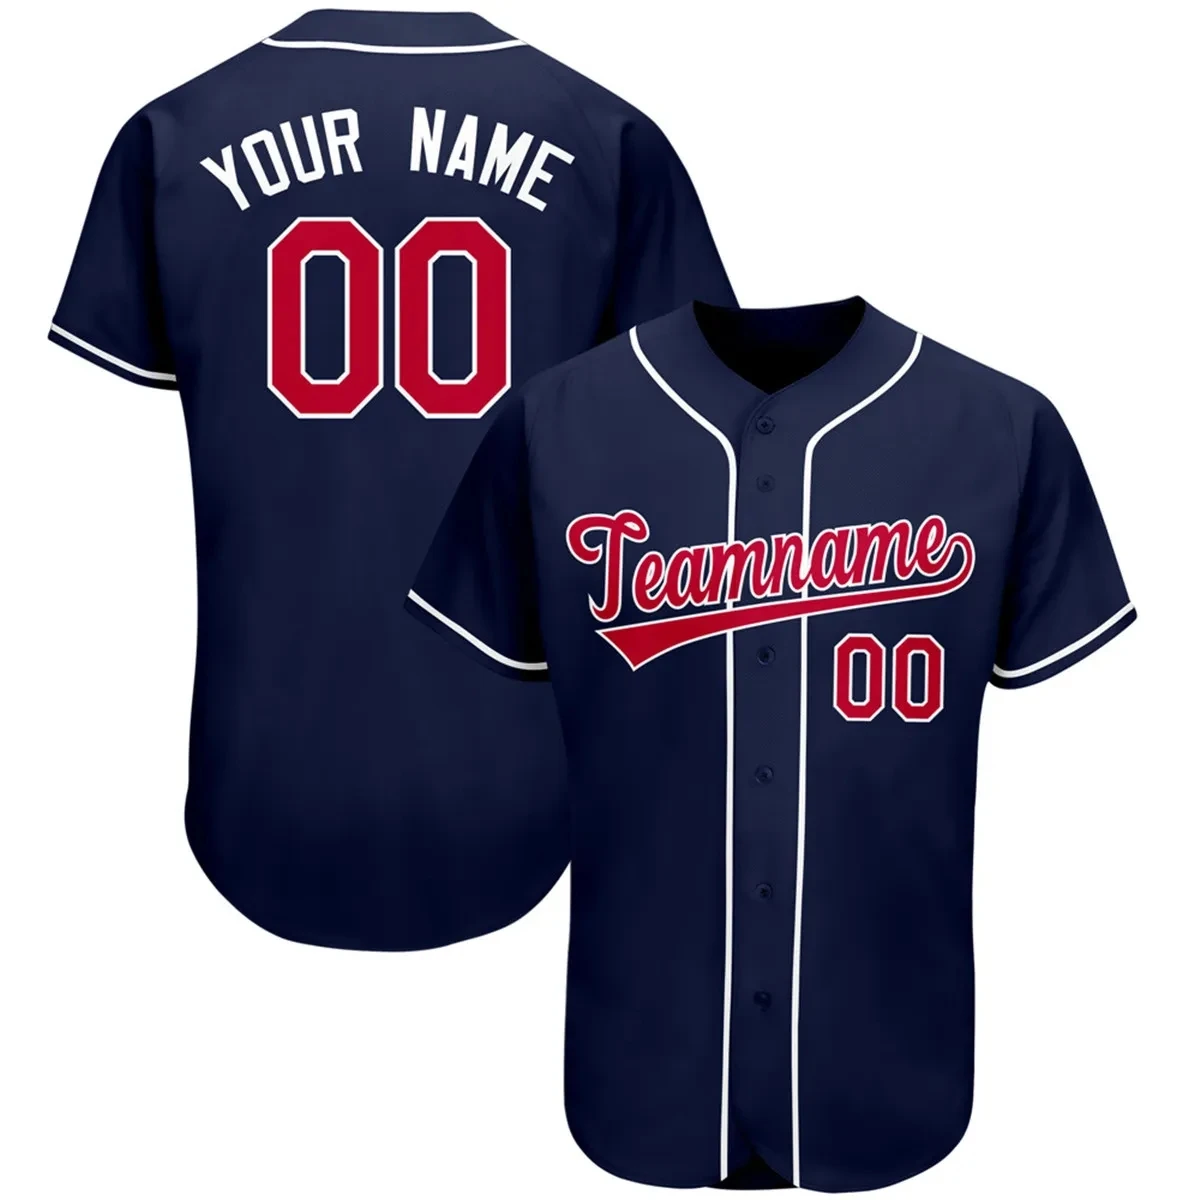 

Custom Baseball Jersey Team Outdoors Sports Customized Your Name Number V-Neck Streetwear Male Women Child Any Coloure Style